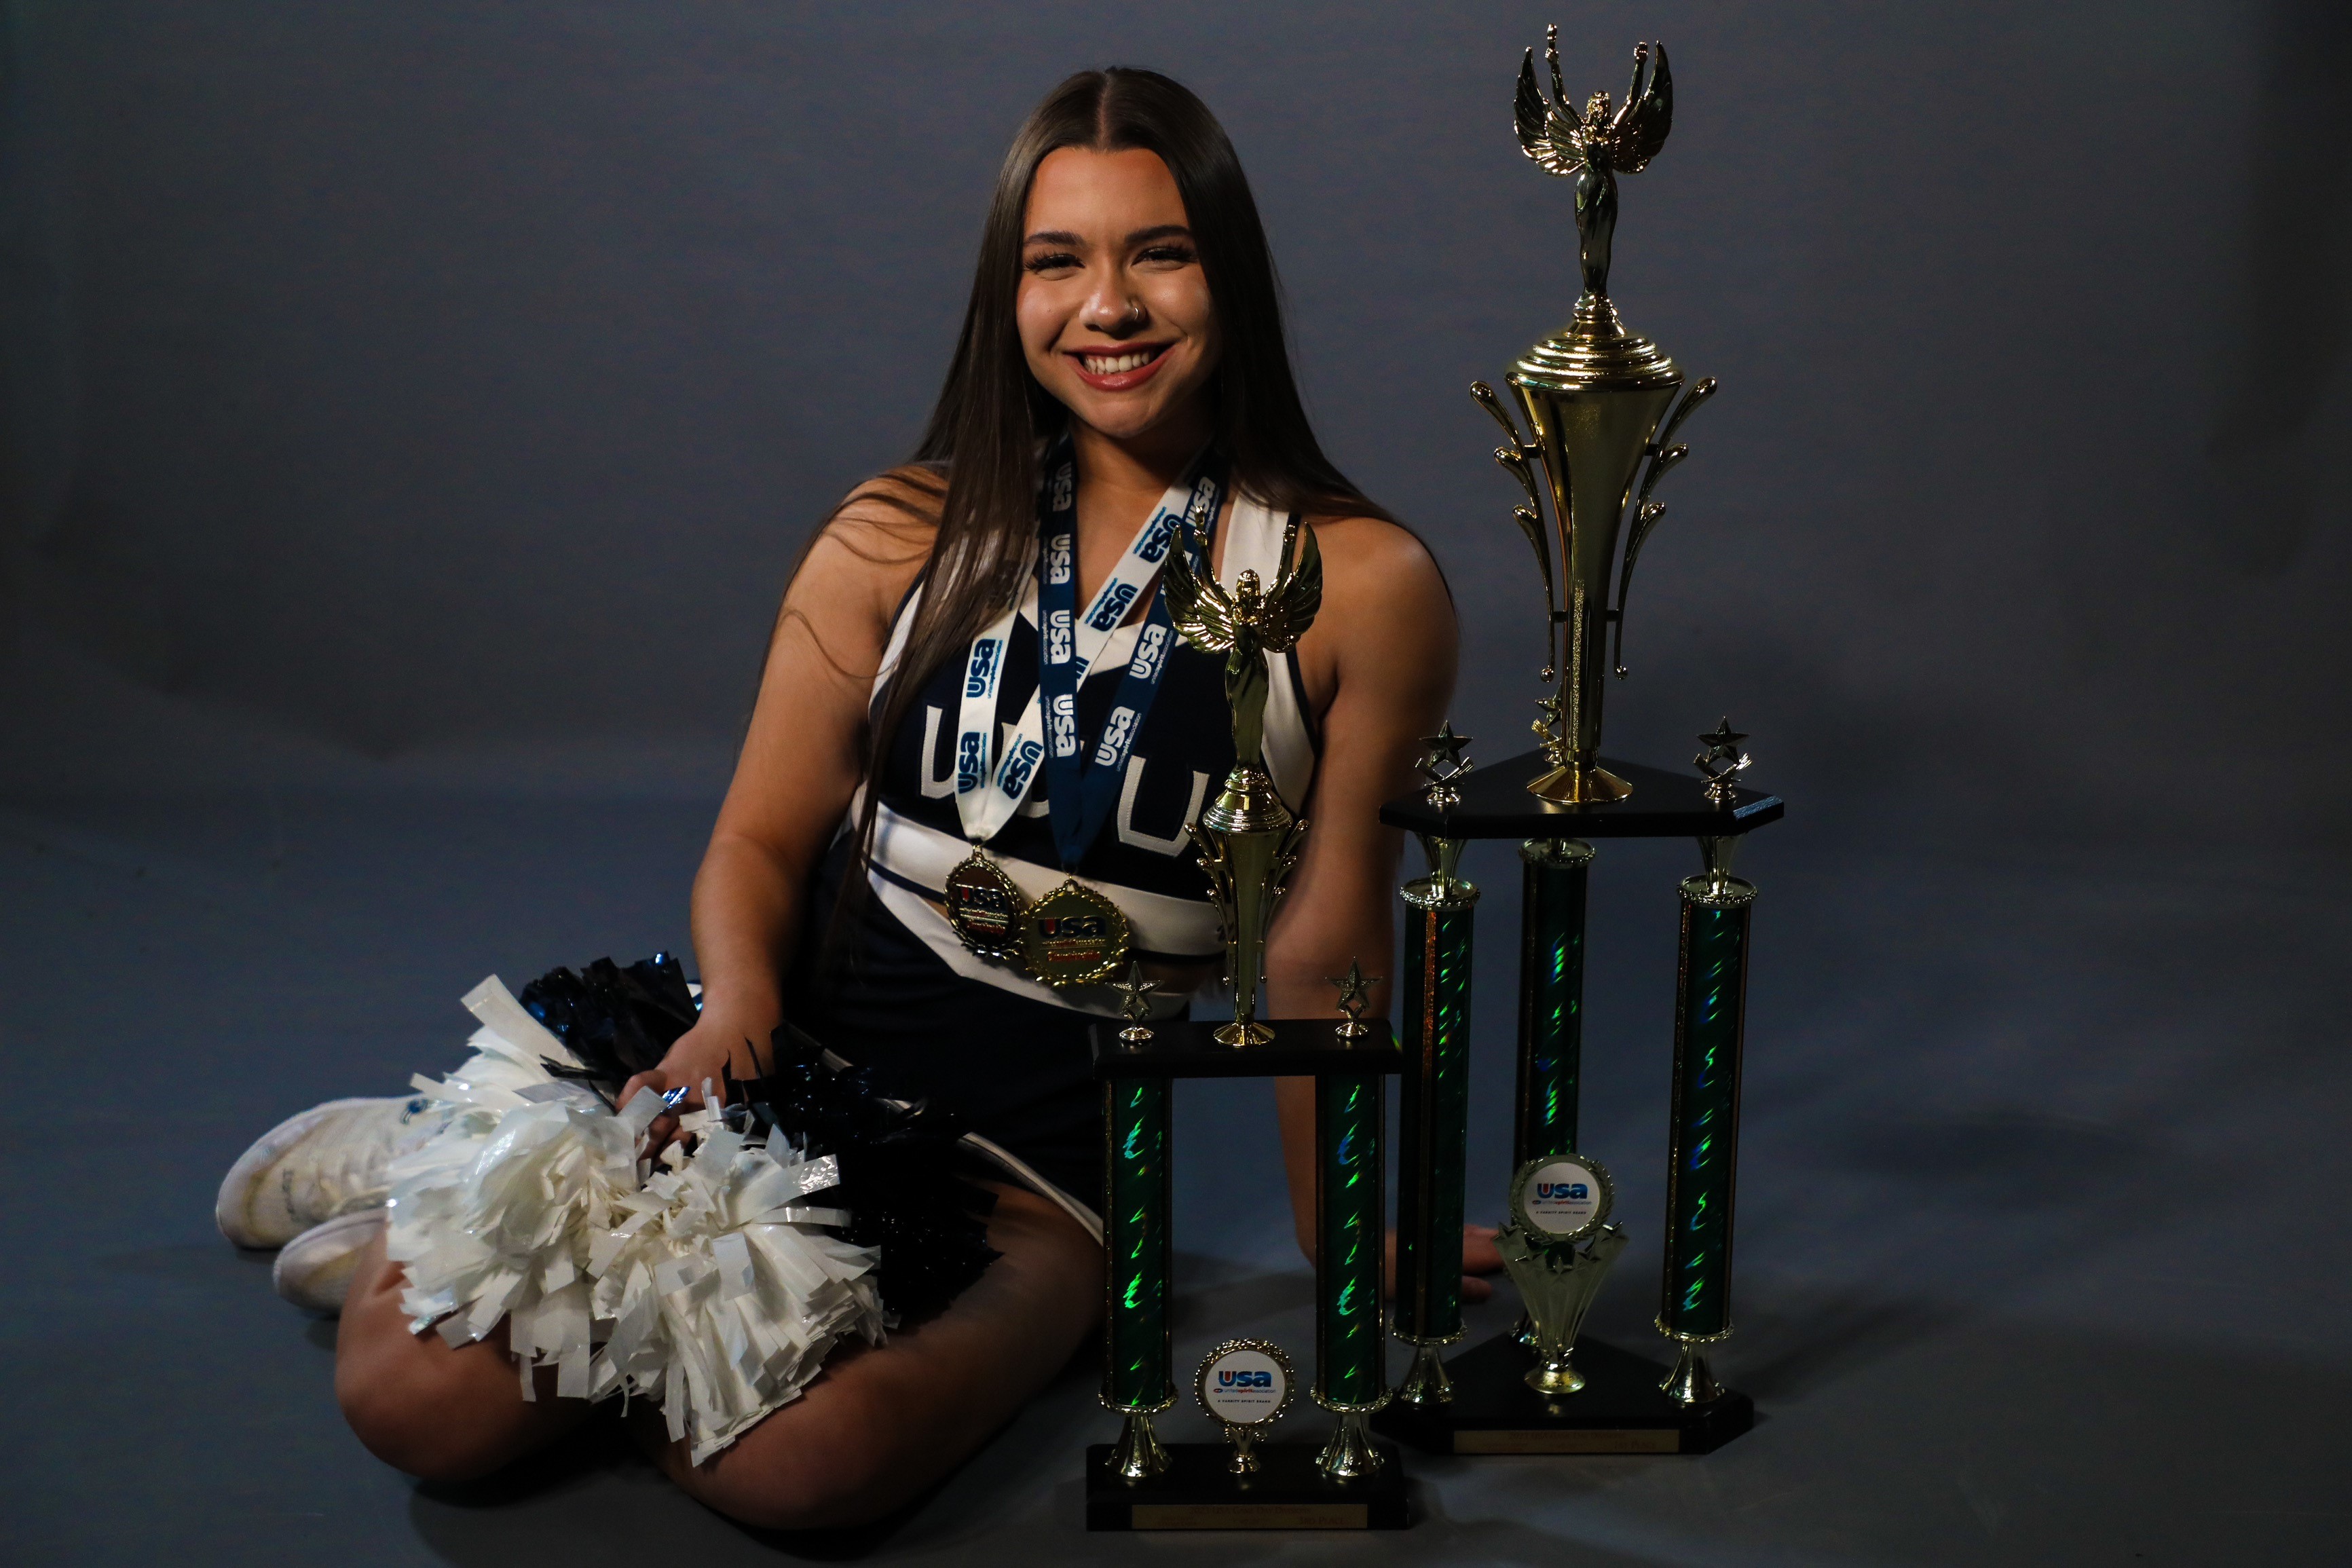 Amirah Casey, in her cheer uniform, sits next to a gigantic trophy